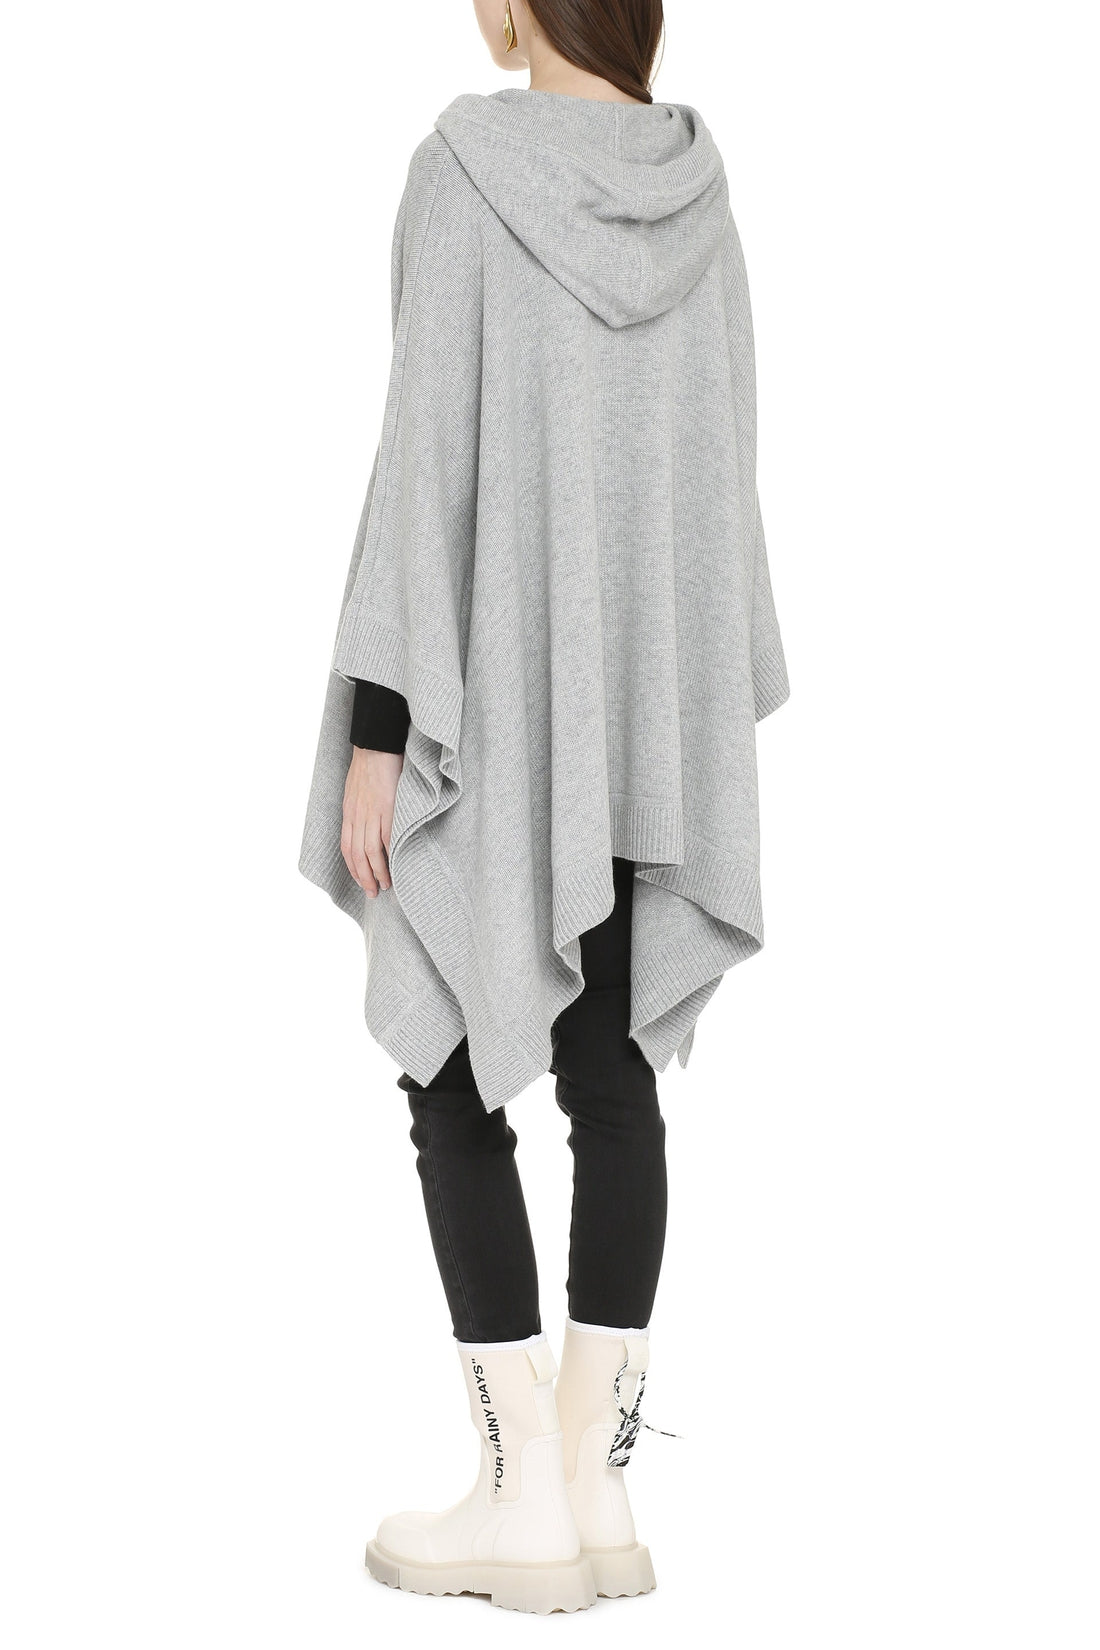 MICHAEL MICHAEL KORS-OUTLET-SALE-Hooded wool poncho-ARCHIVIST